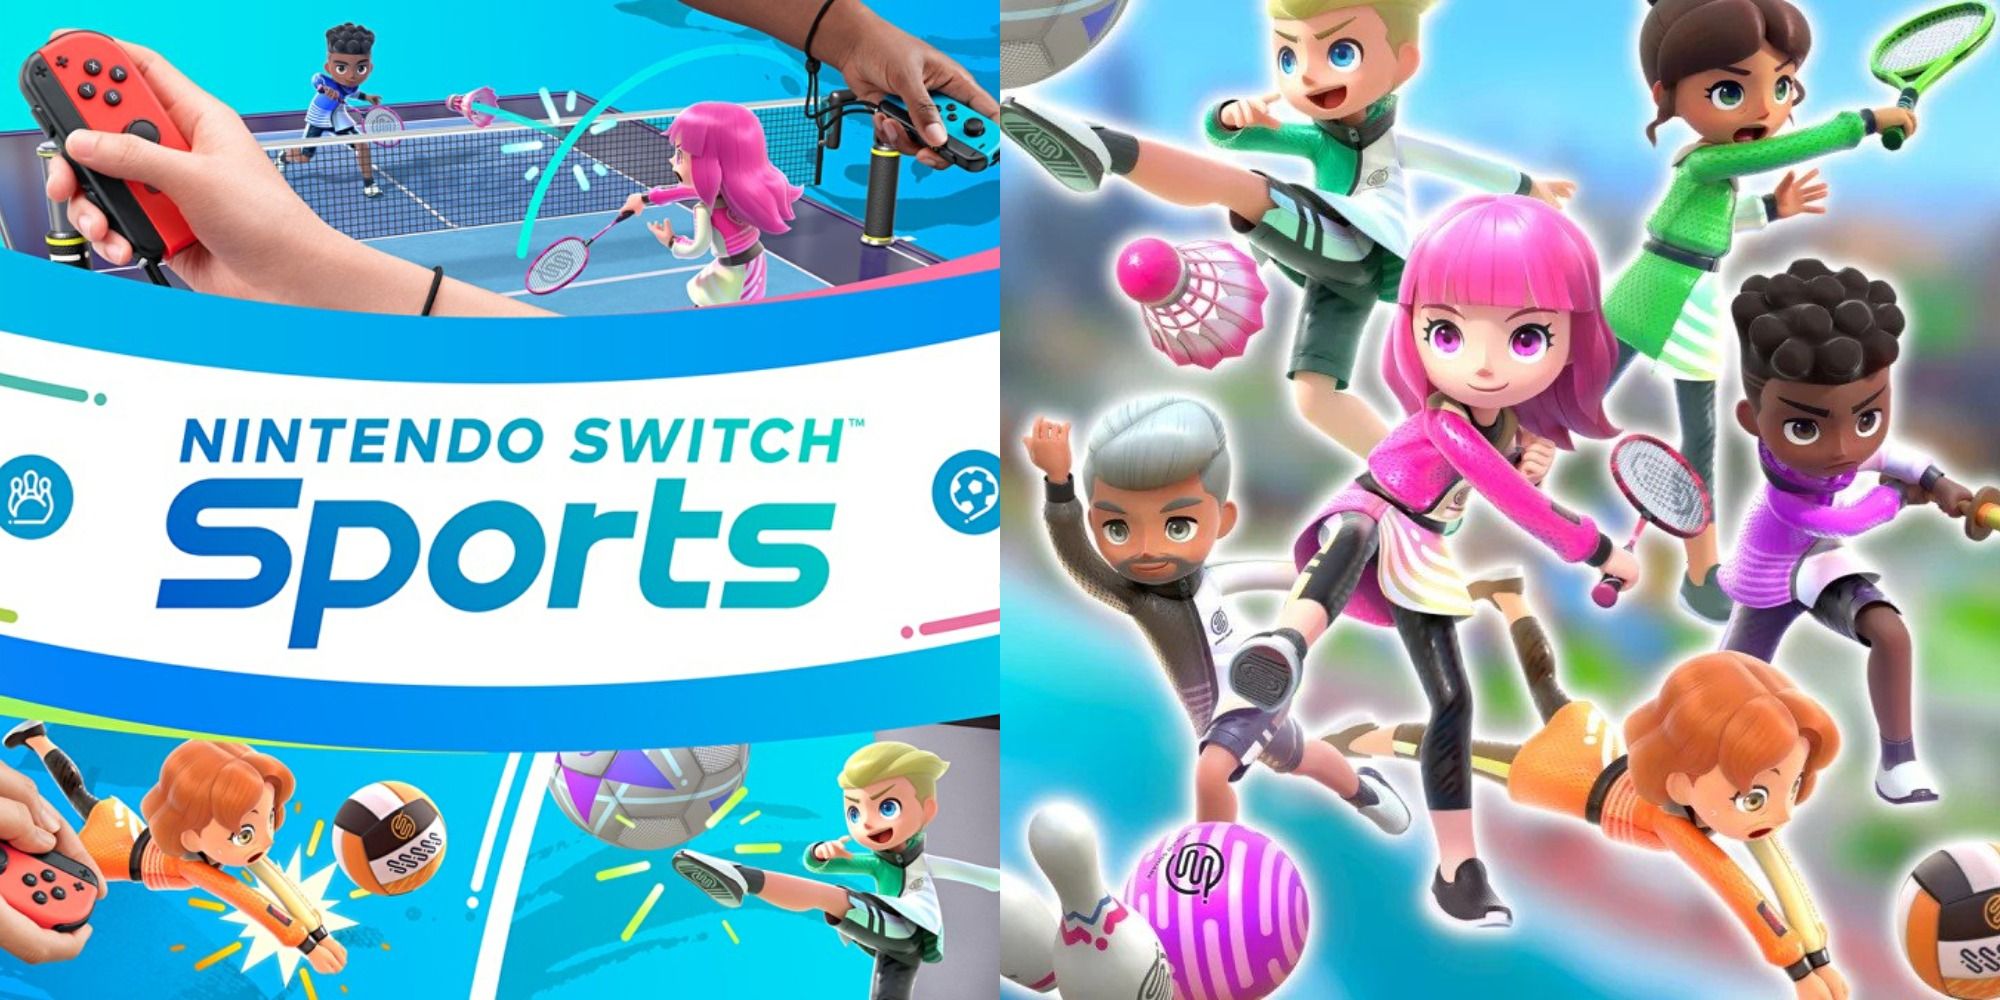 Split image showing the cover of Nintendo Switch Sports and characters from the game